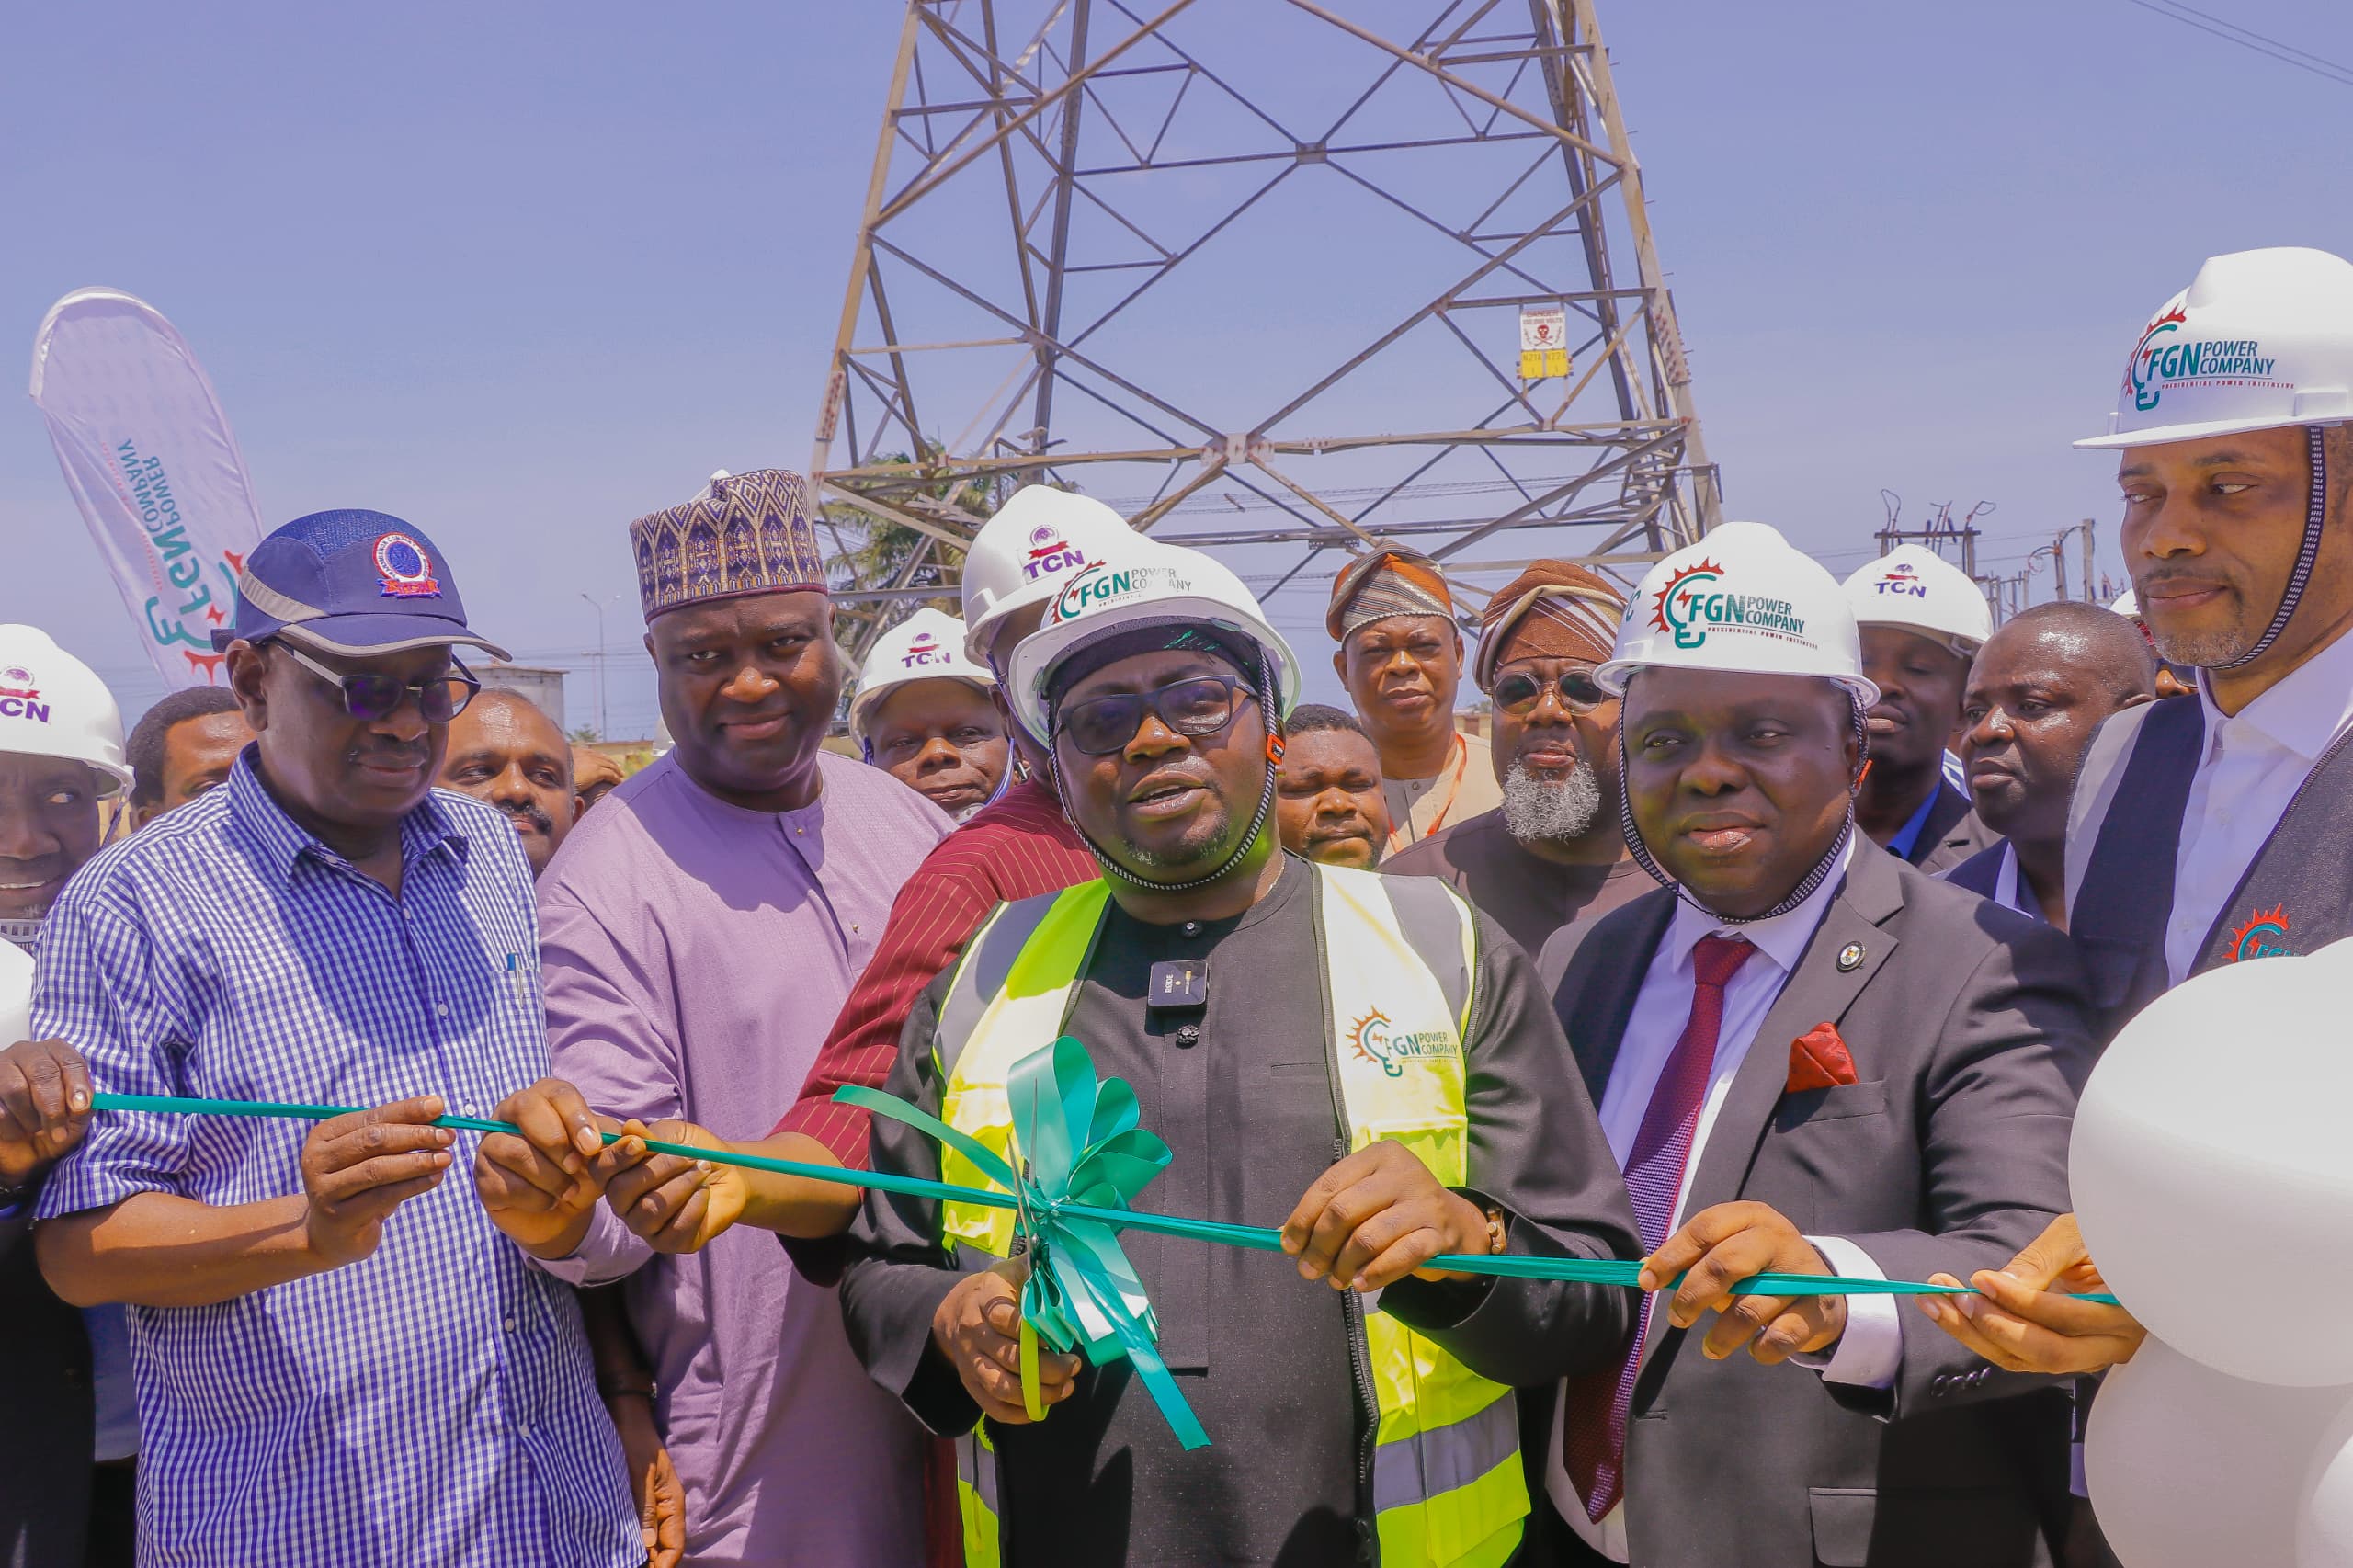 FG Adds 625MW to National Grid, As Adelabu Commissions Two Mobile Substations in Ajah, Bernin Kebbi